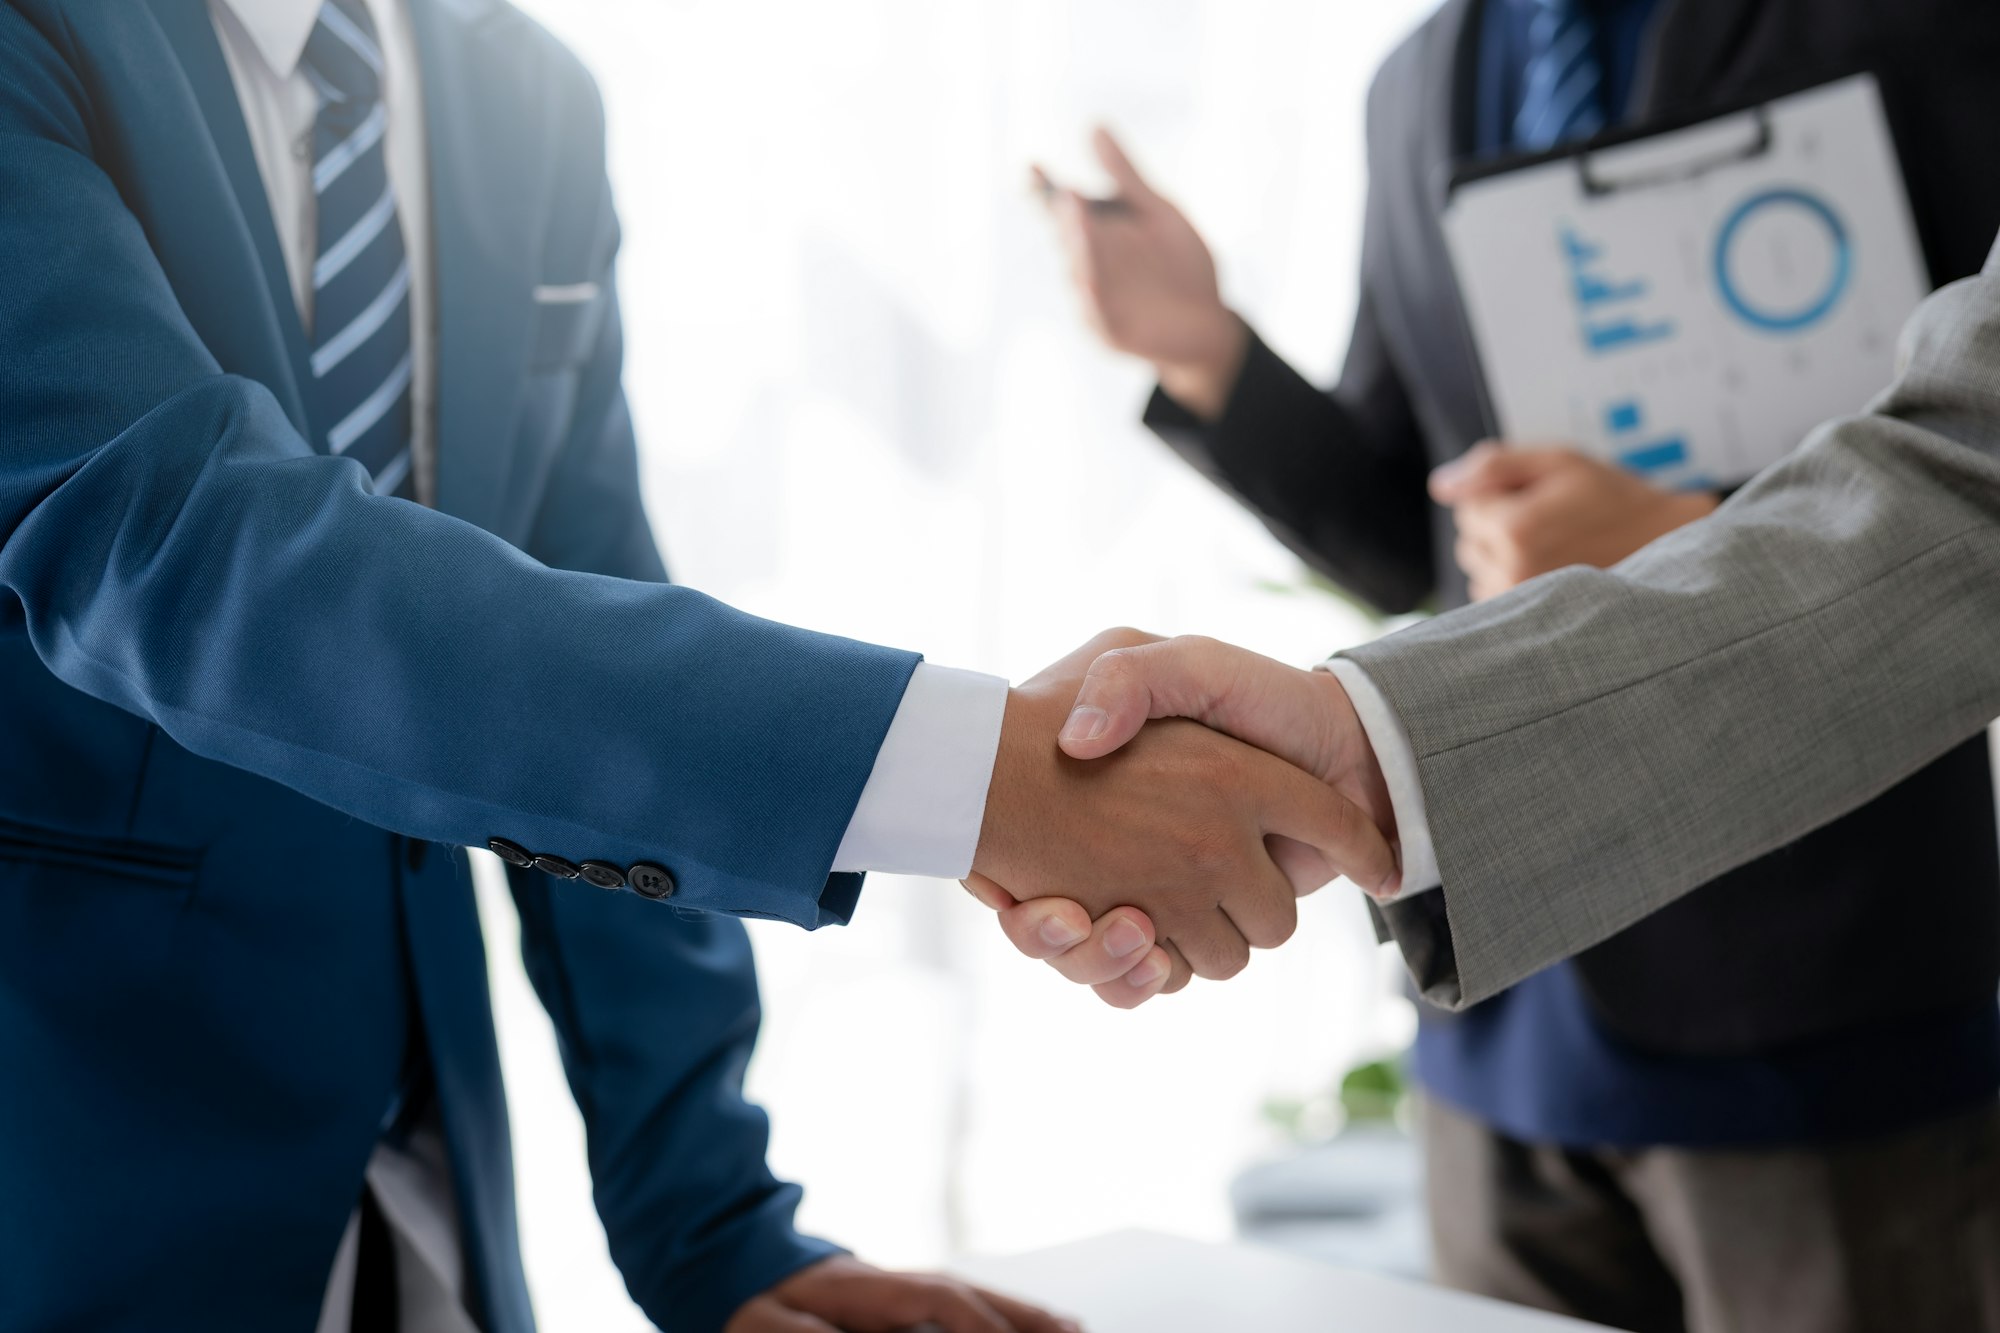 Successful co-investment. Business people handshake represent successful negotiations.